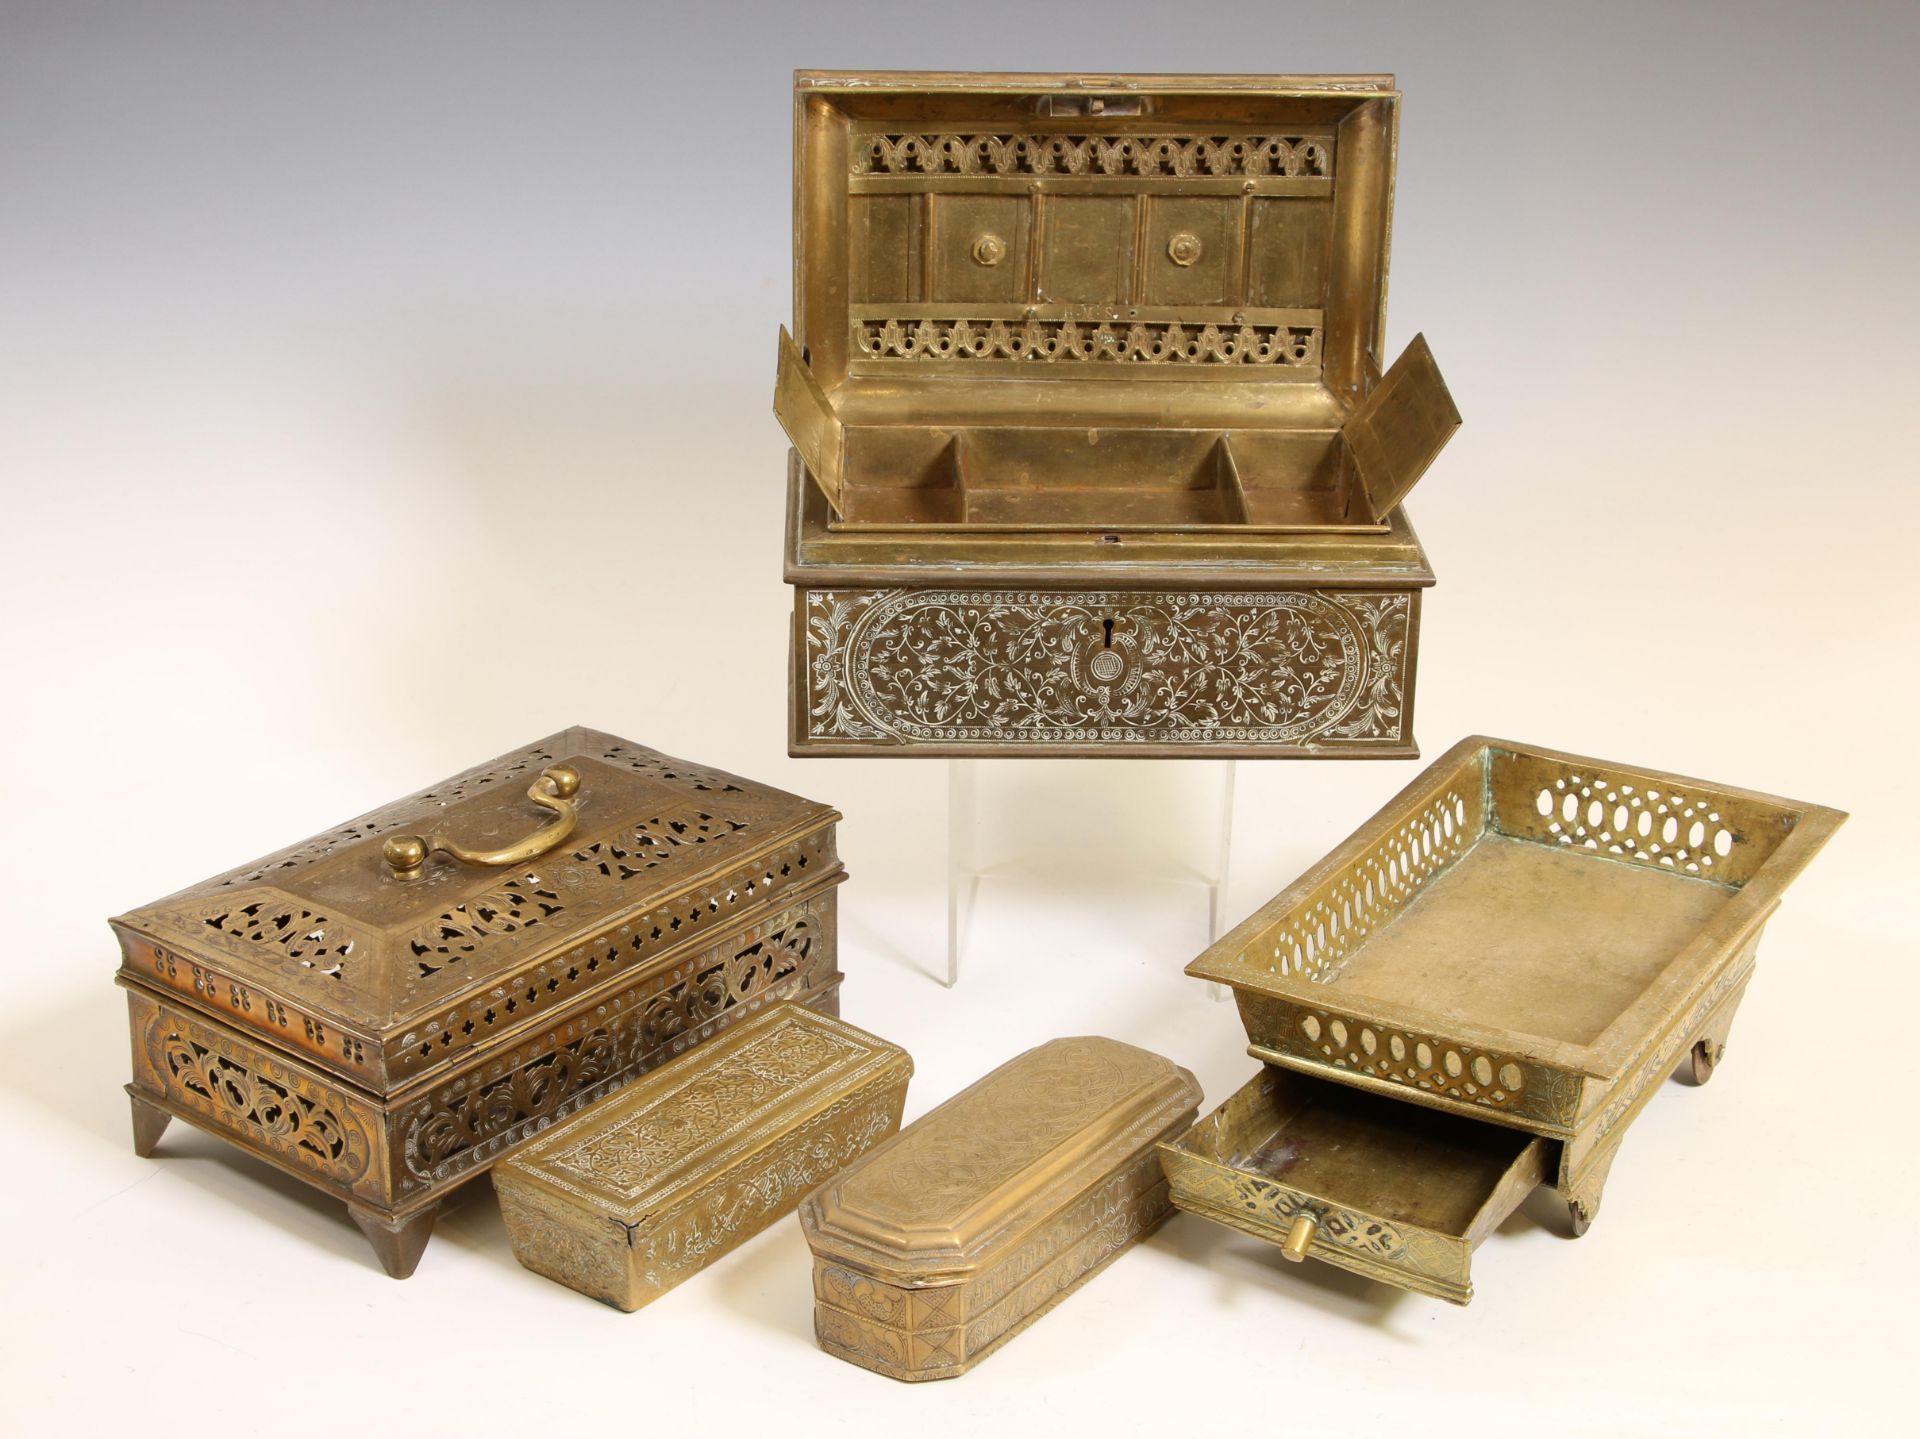 Sumatra-Java, a collection of copper alloy boxes and offering bowls; - Image 2 of 2